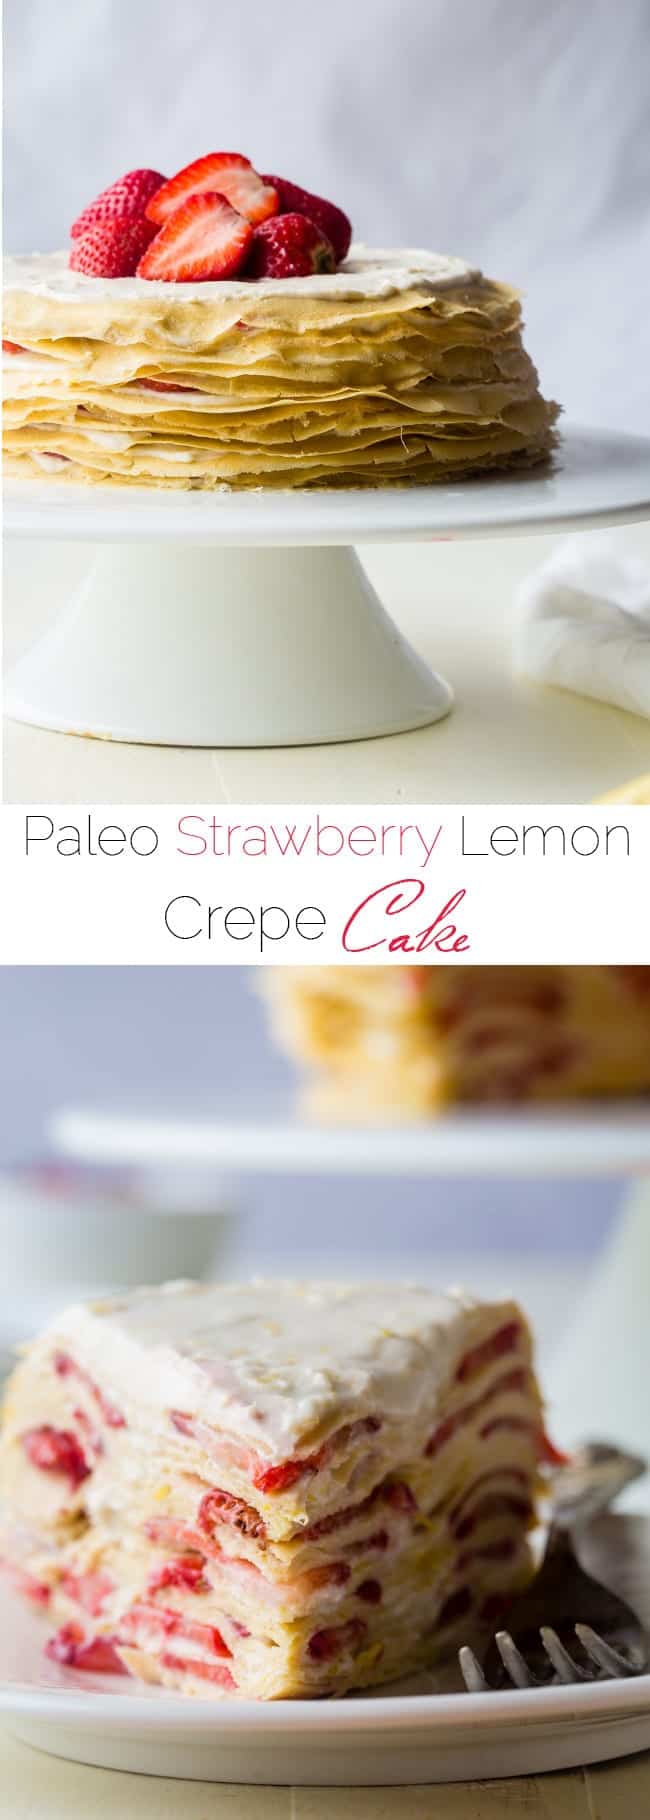 Strawberry Lemon Paleo Crepe Cake with Coconut Cream - This cake is made out of paleo crepes layered with rich, sweet lemon coconut cream and fresh strawberries. It's a gluten free dessert, that's perfect for a spring brunch or Mothers day! | Foodfaithfitness.com | @FoodFaithFit